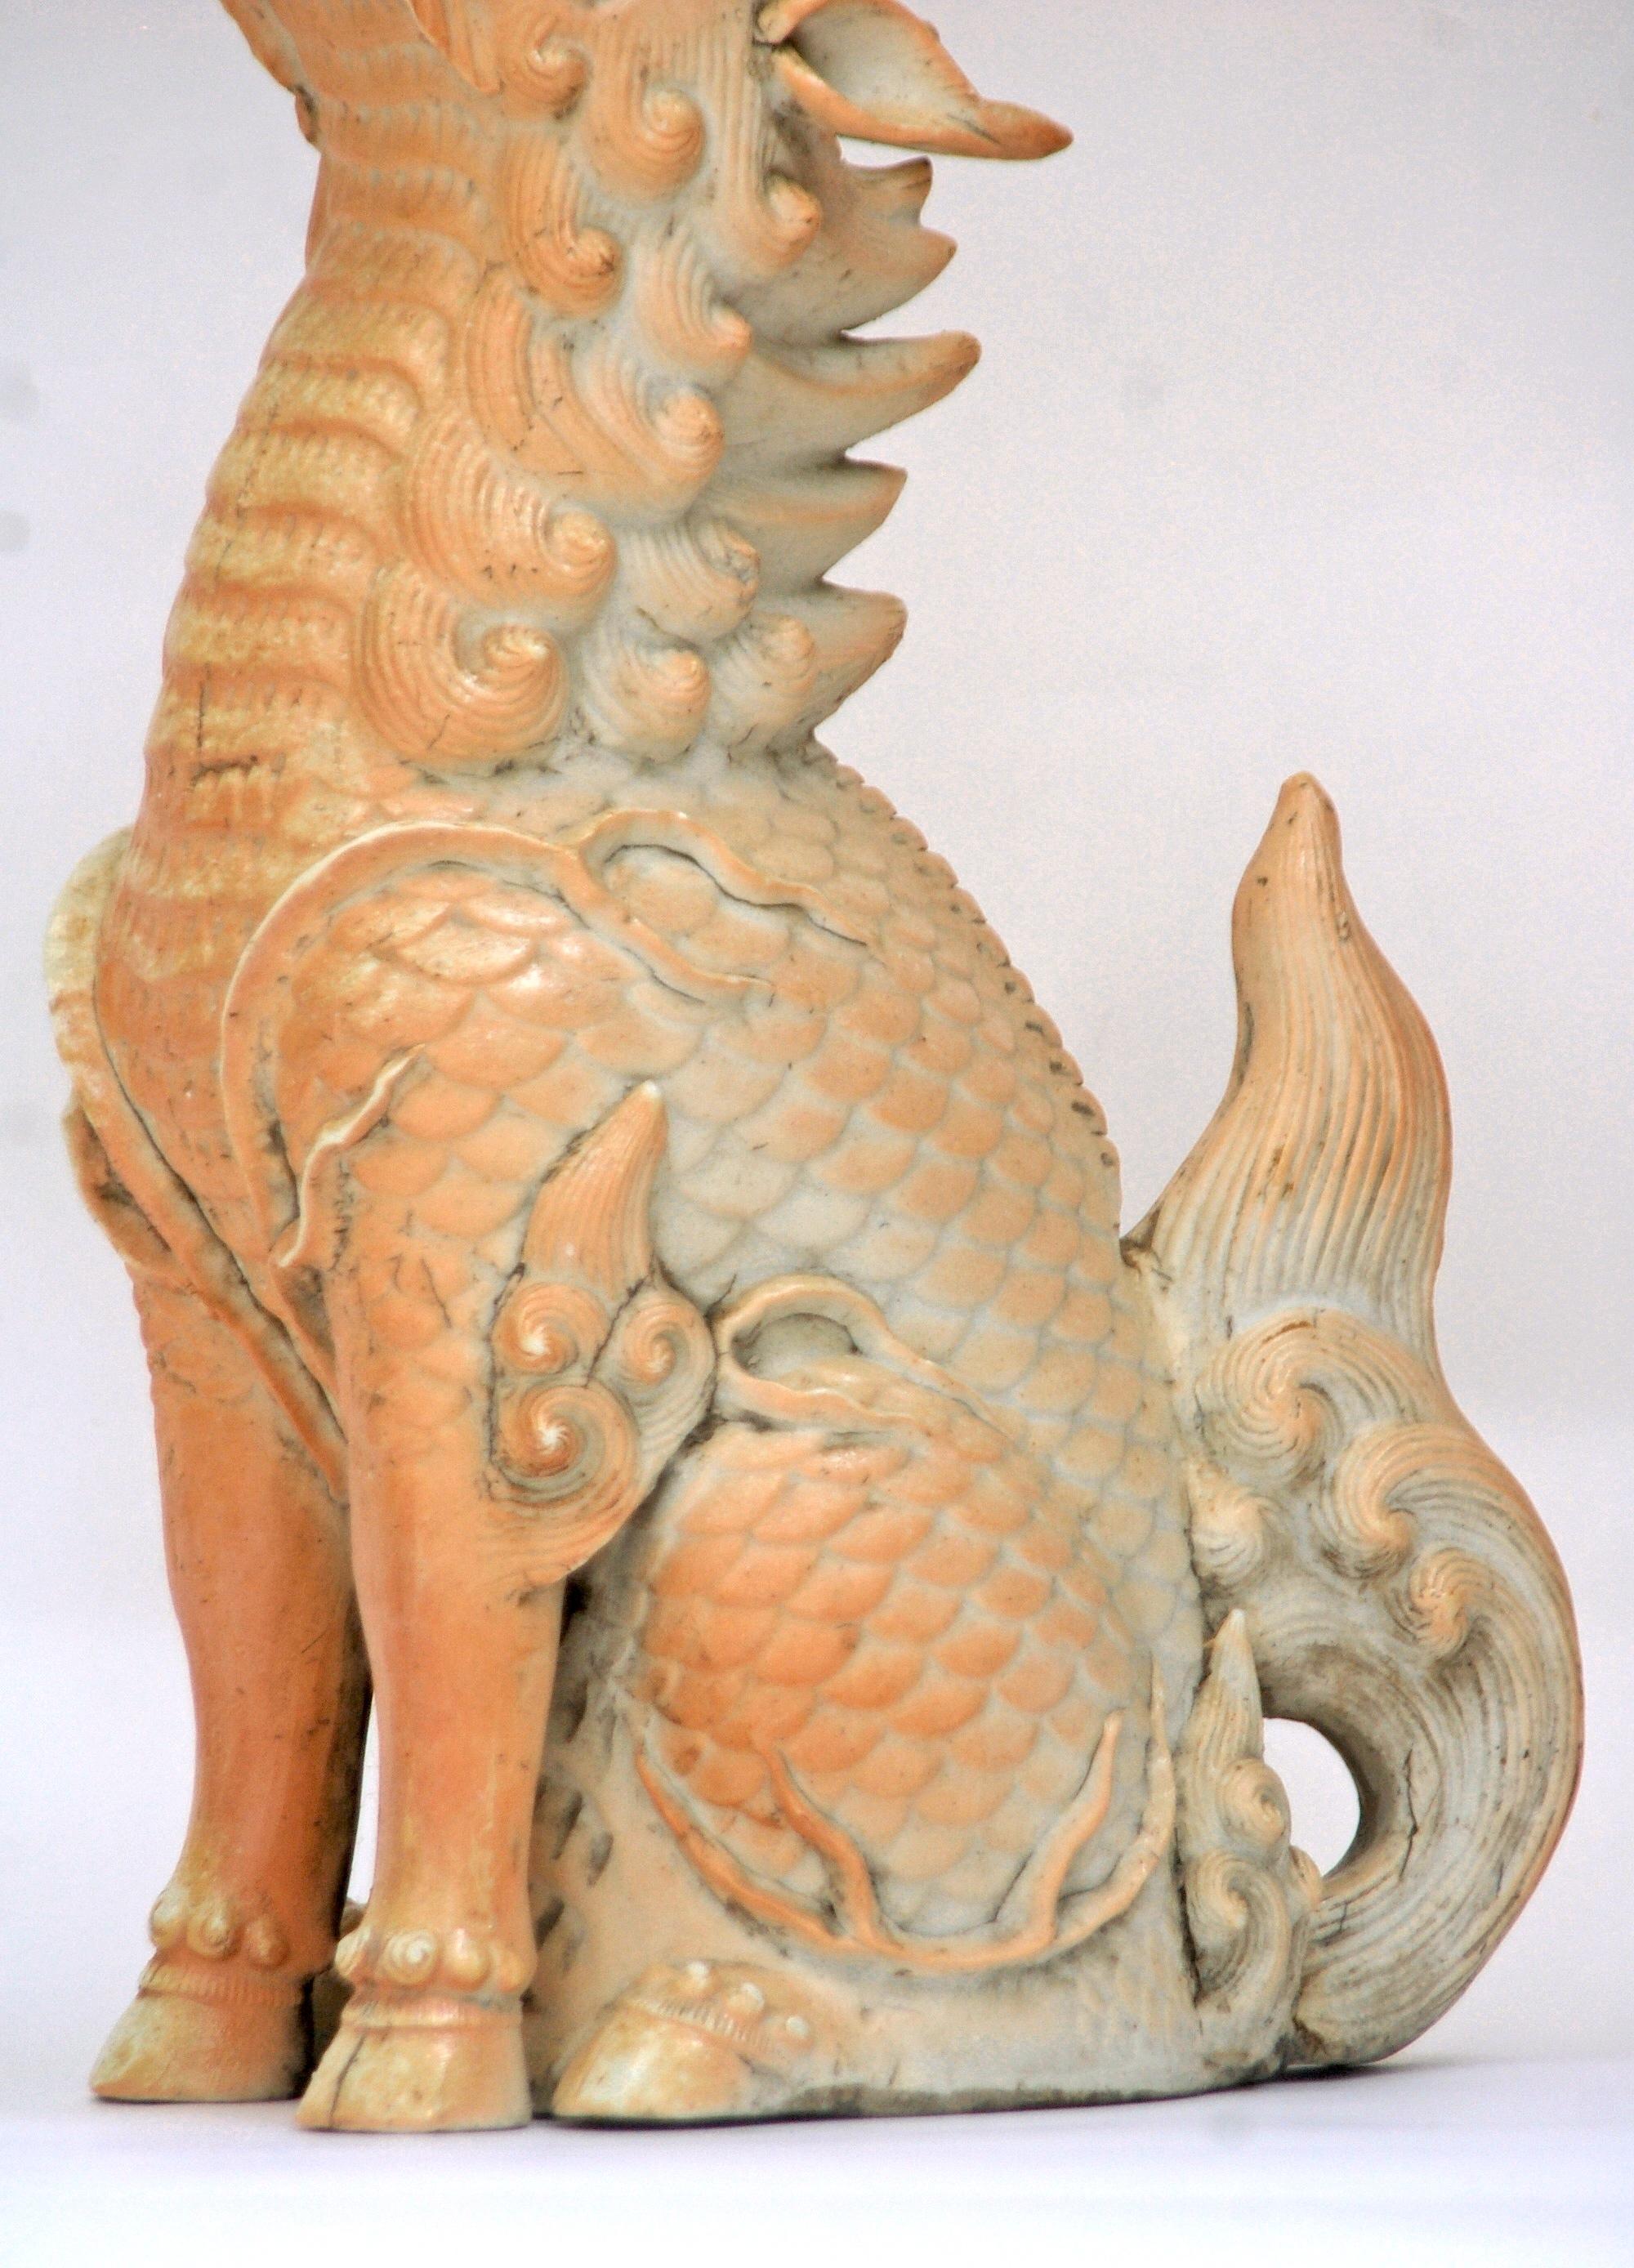 Large and stunning Japanese Kirin attributed to Hirado complete with Horn, hoof feet and dragon face. Beautiful colors and details make this magnificent mythological creature very dynamic even though he is sometimes mistaken as a foo dog. His face